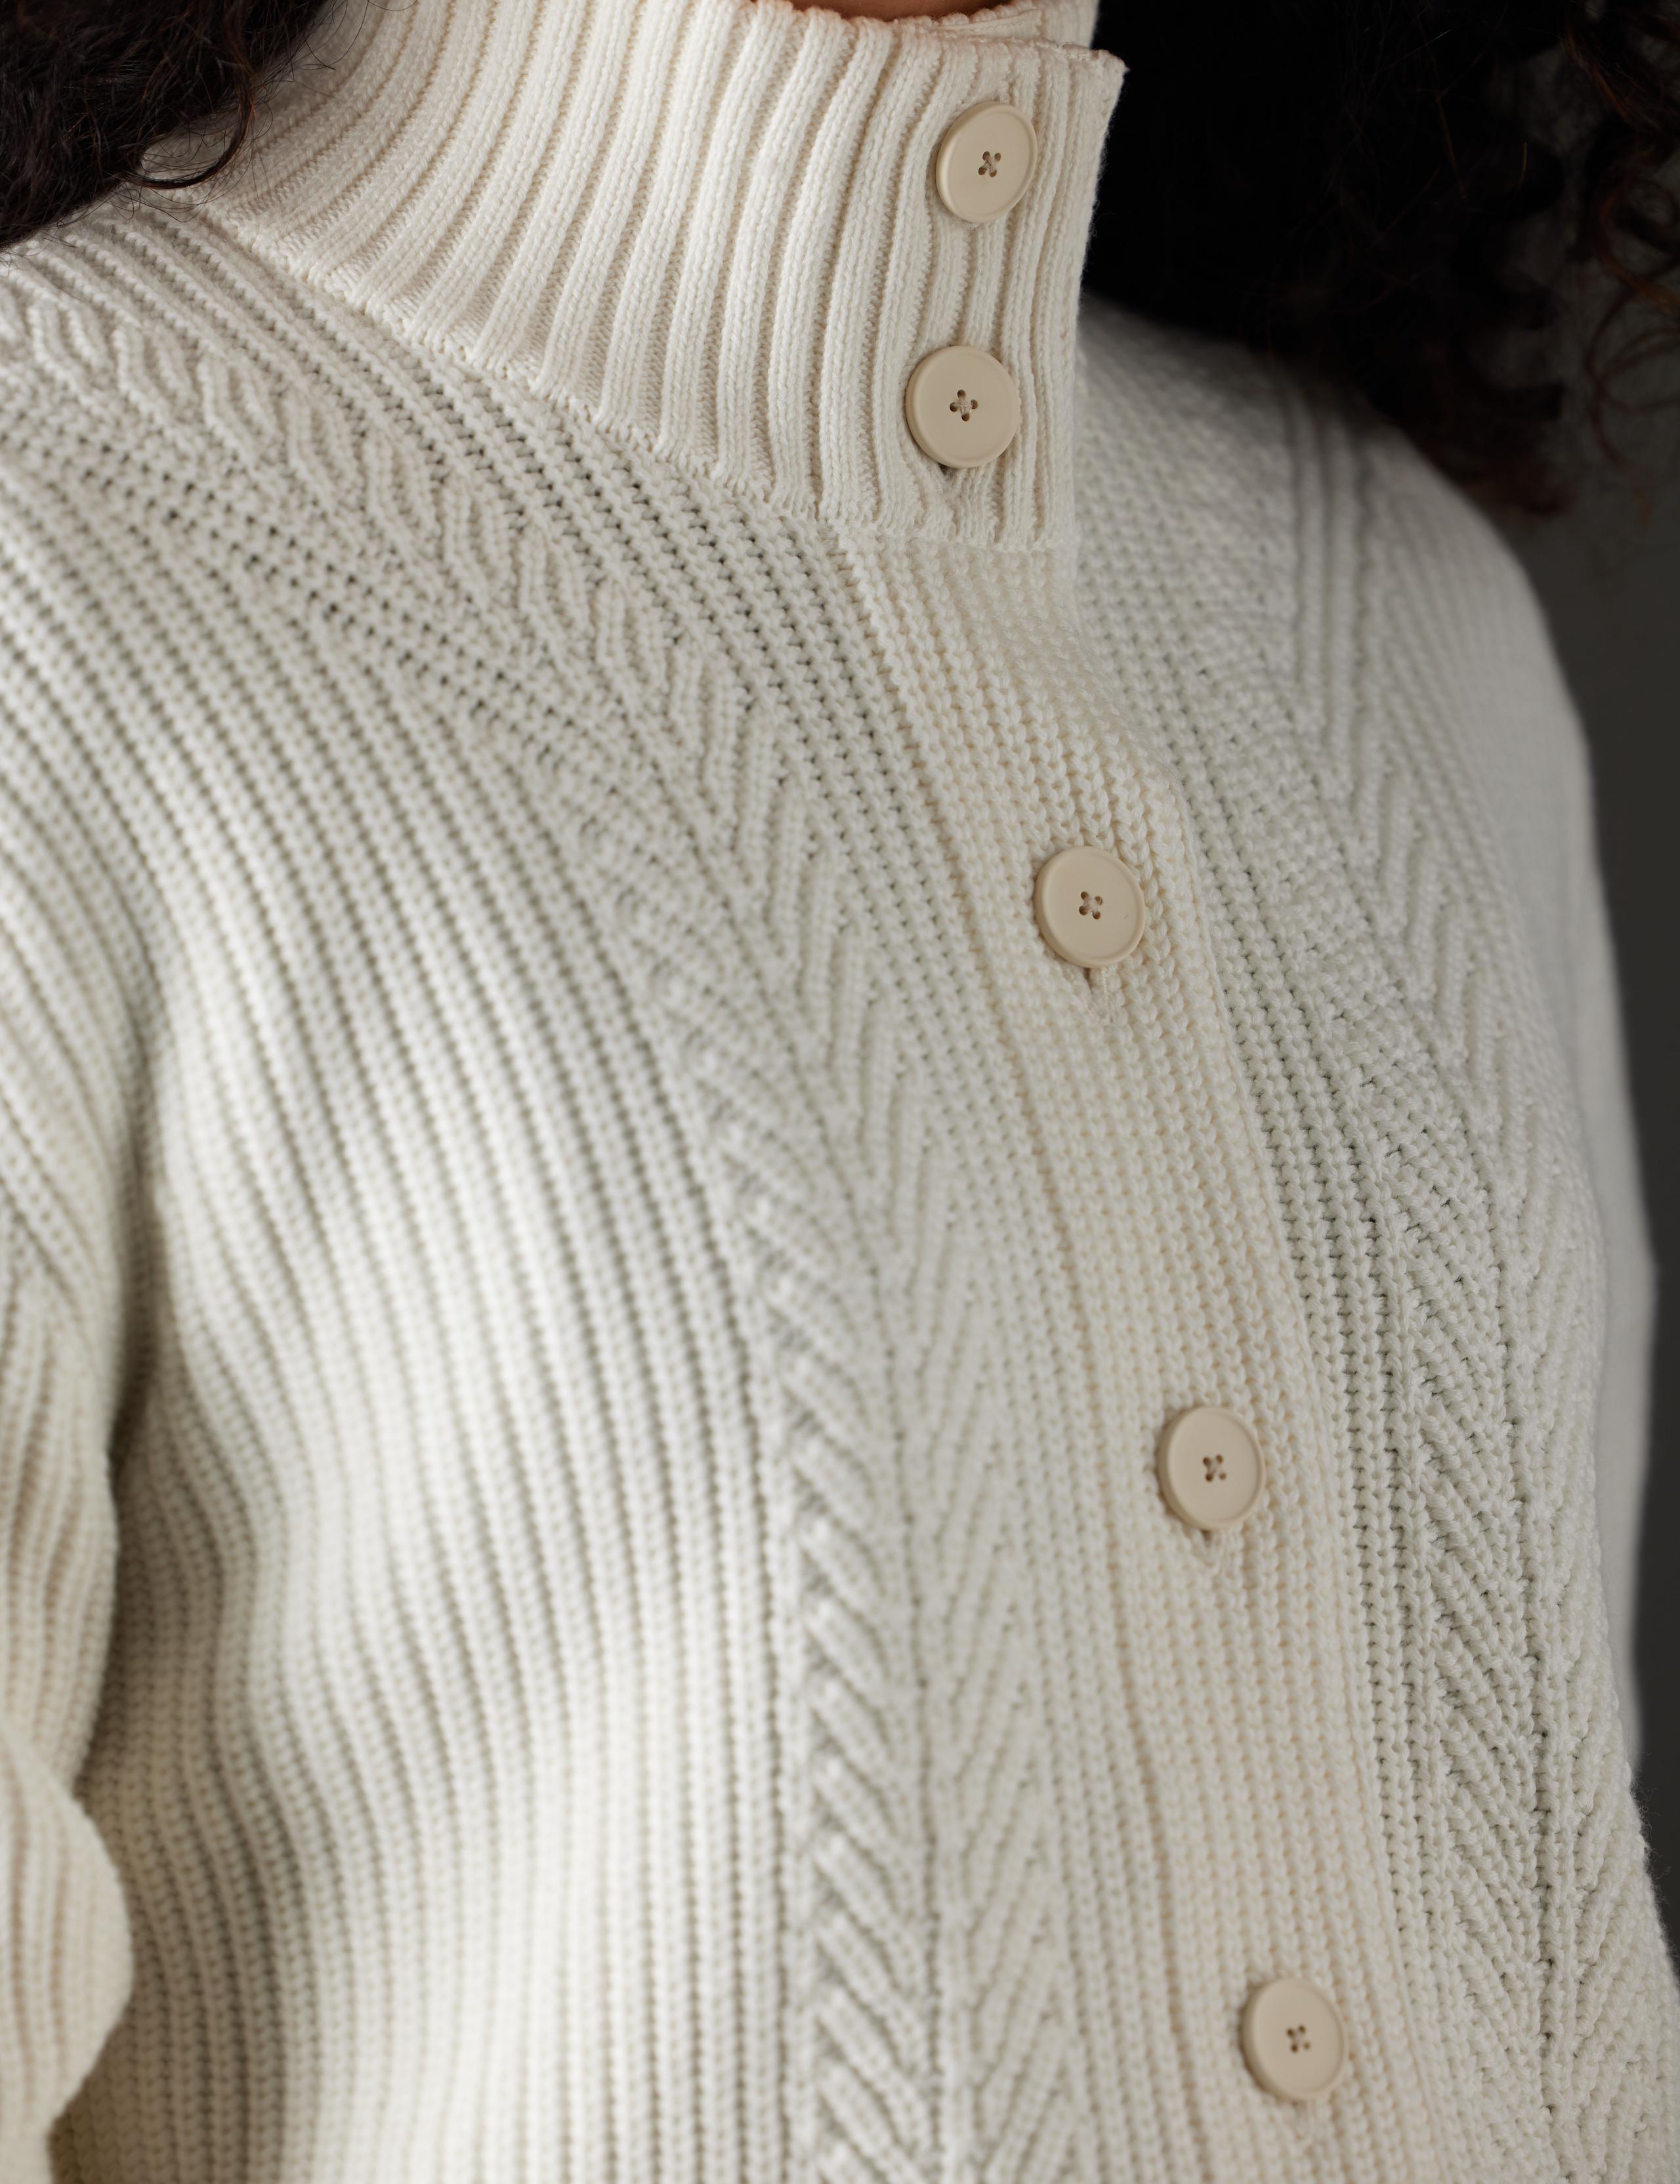 Closeup detail of sweater front